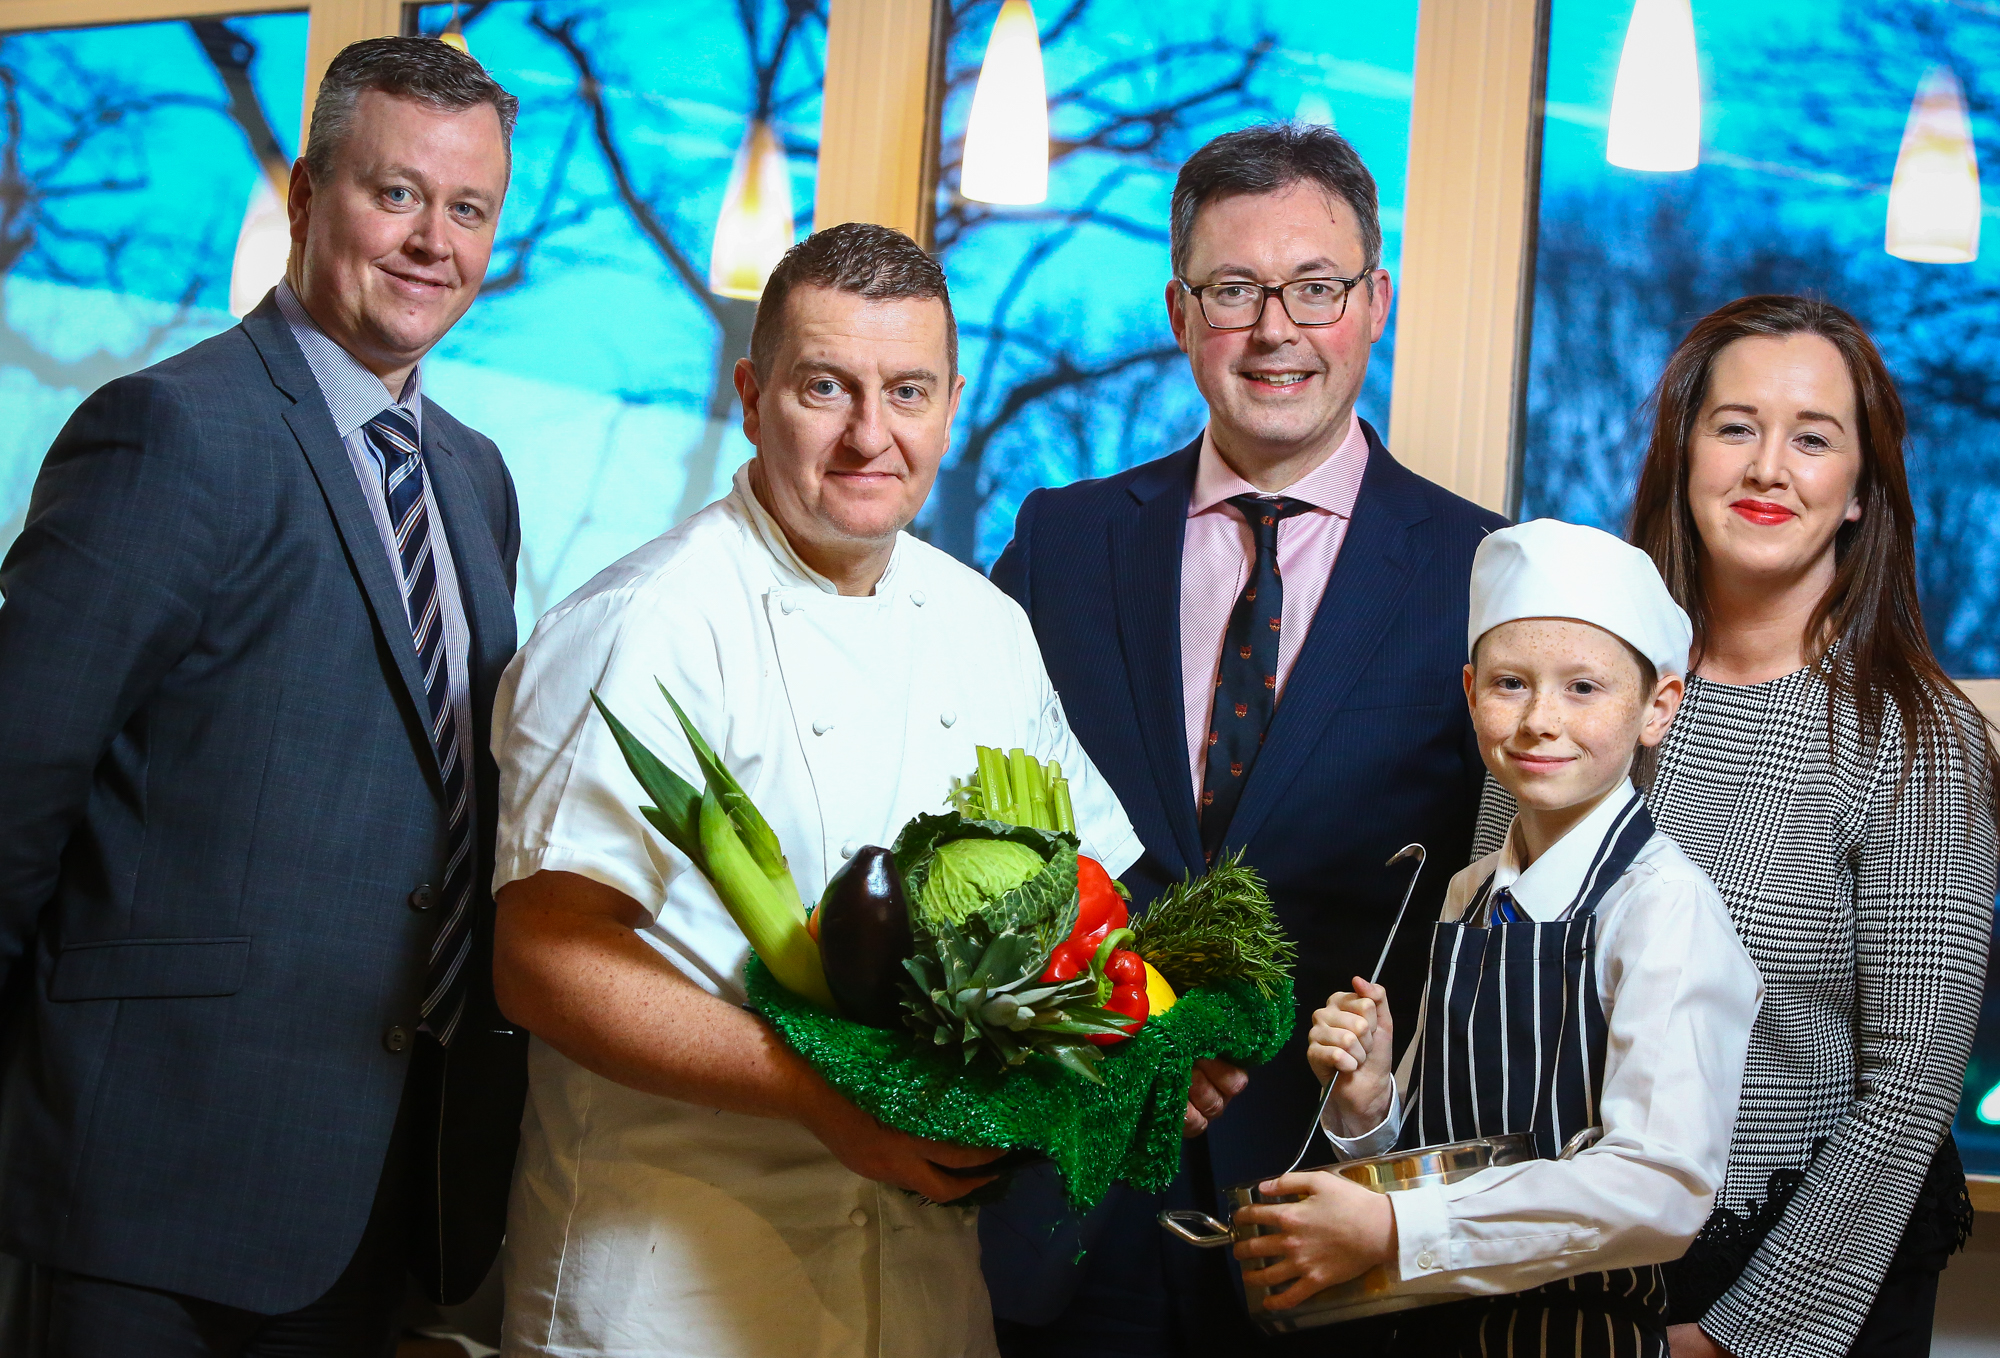 Does your school have the next Jamie Oliver in its midst?